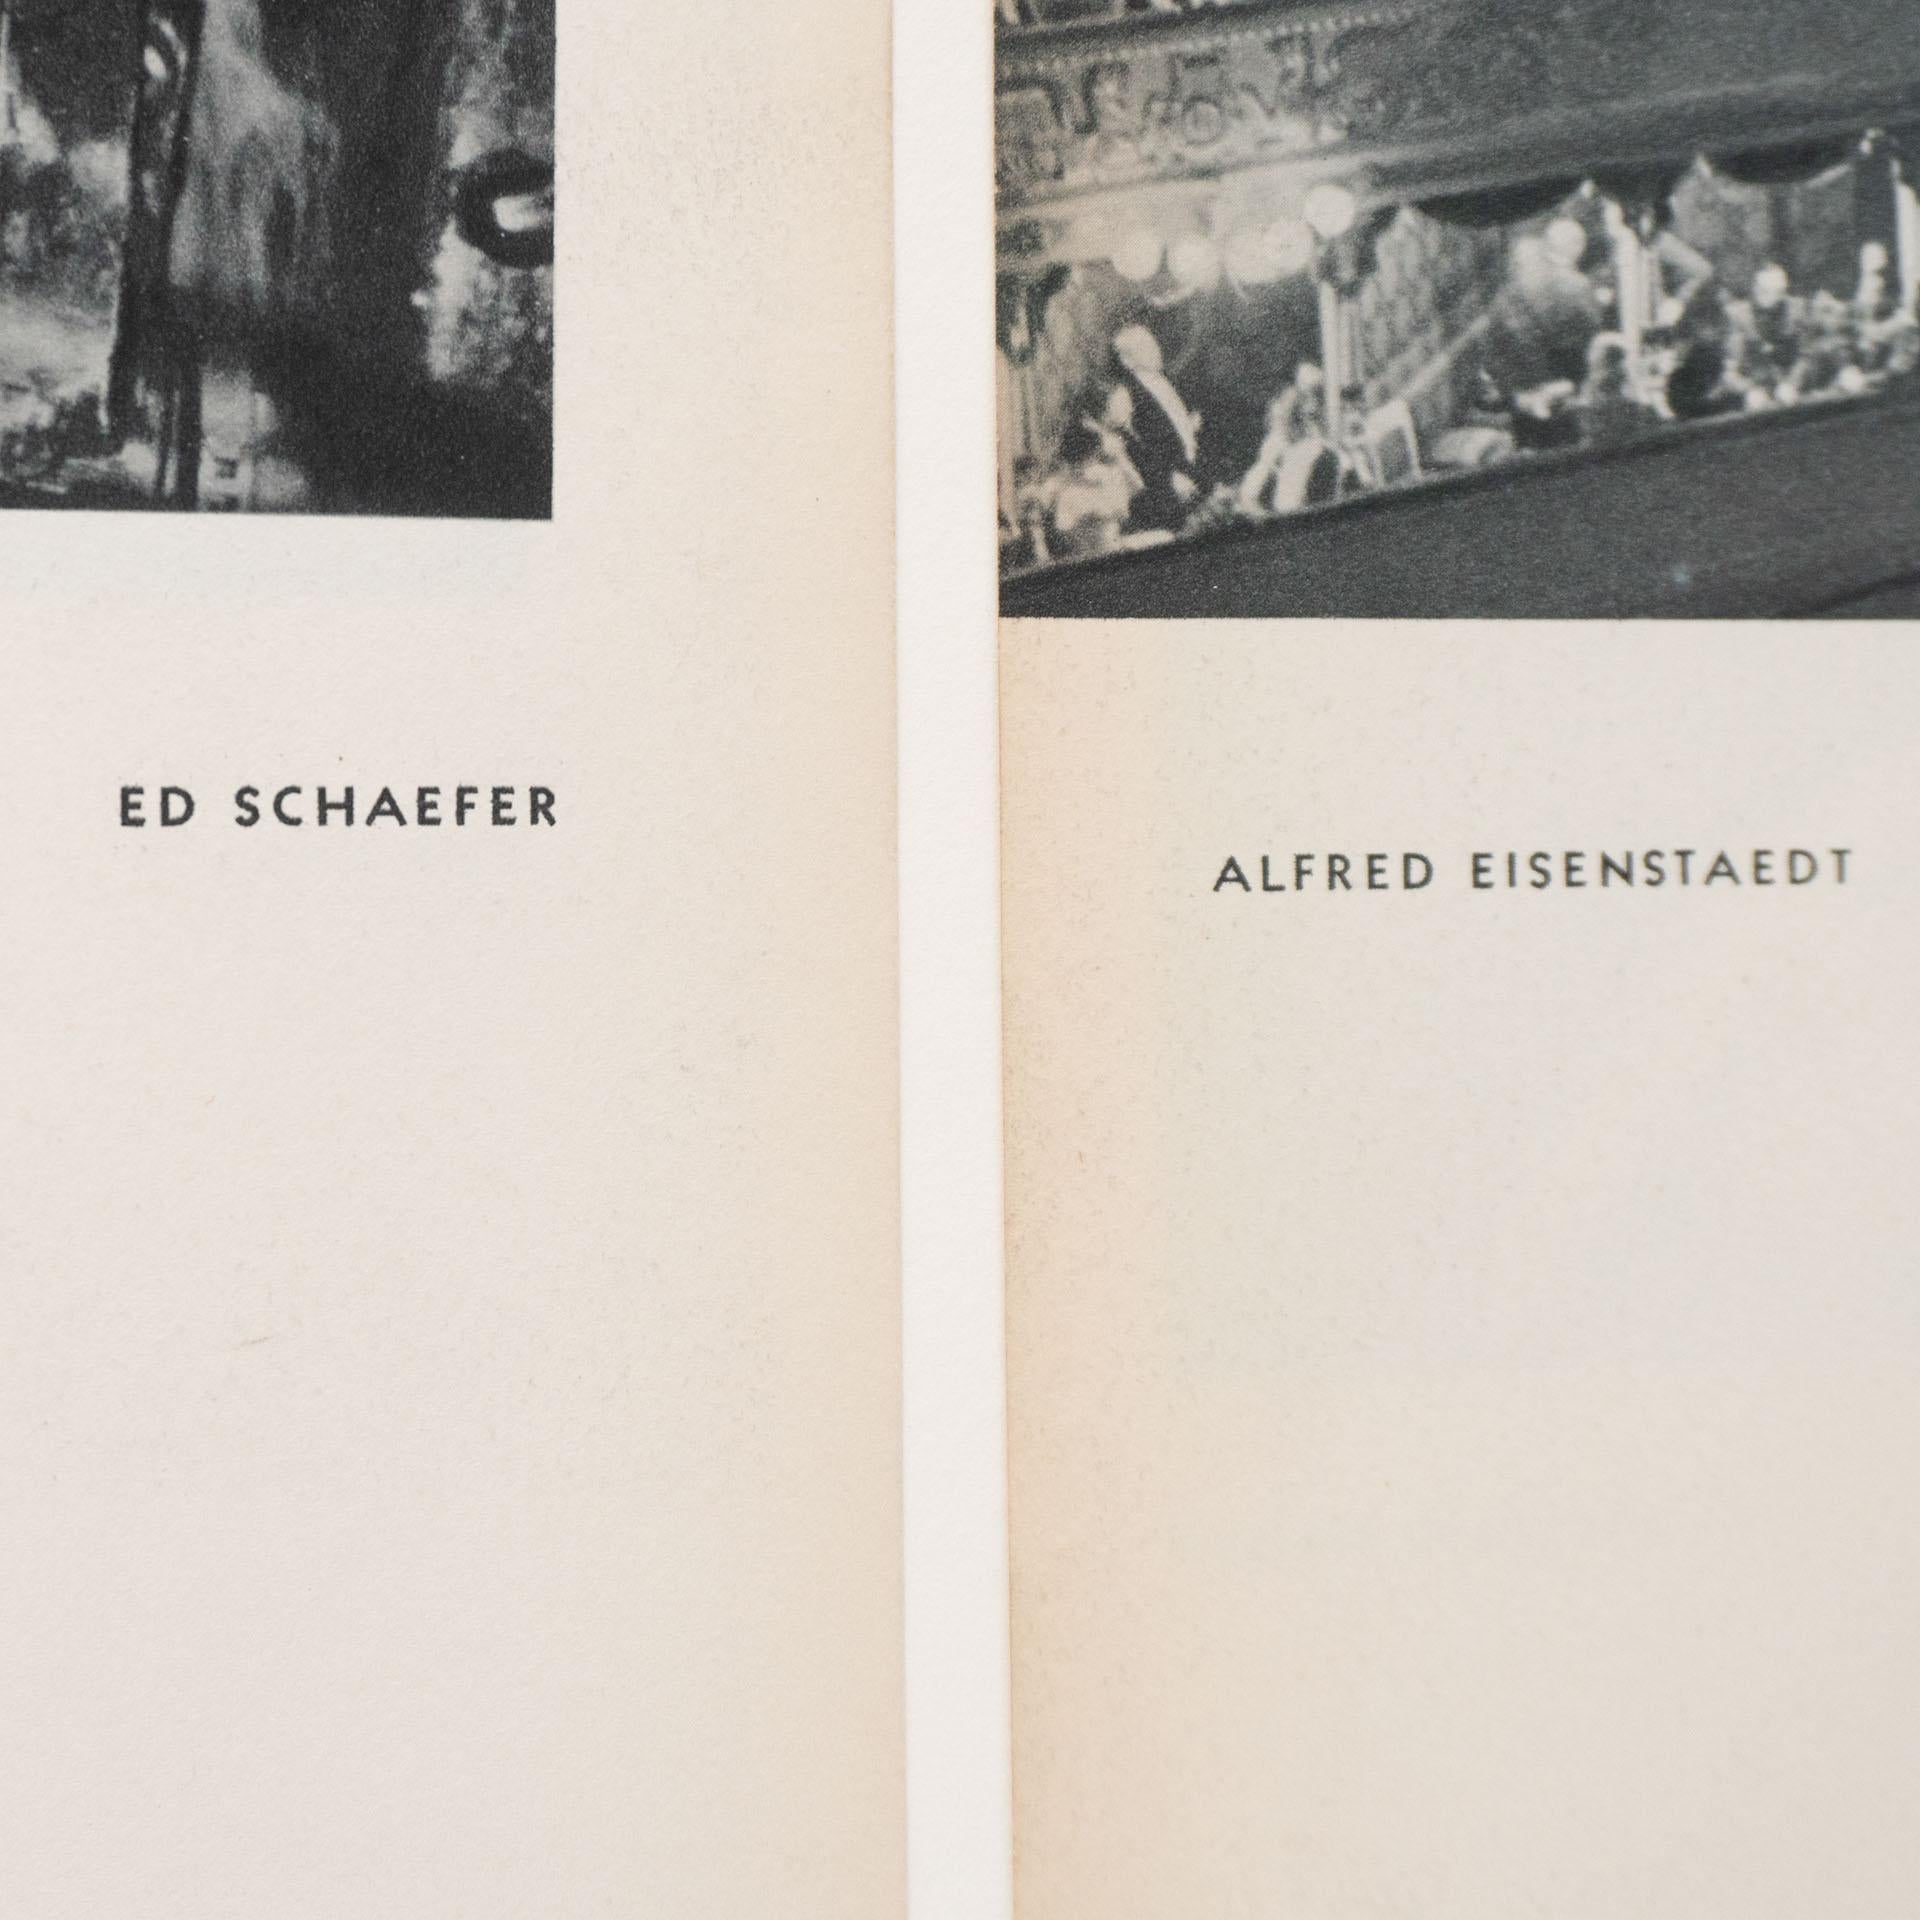 Ed Schaefer and Alfred Eisenstaedt Vintage Photo Gravure, circa 1940 In Good Condition For Sale In Barcelona, Barcelona